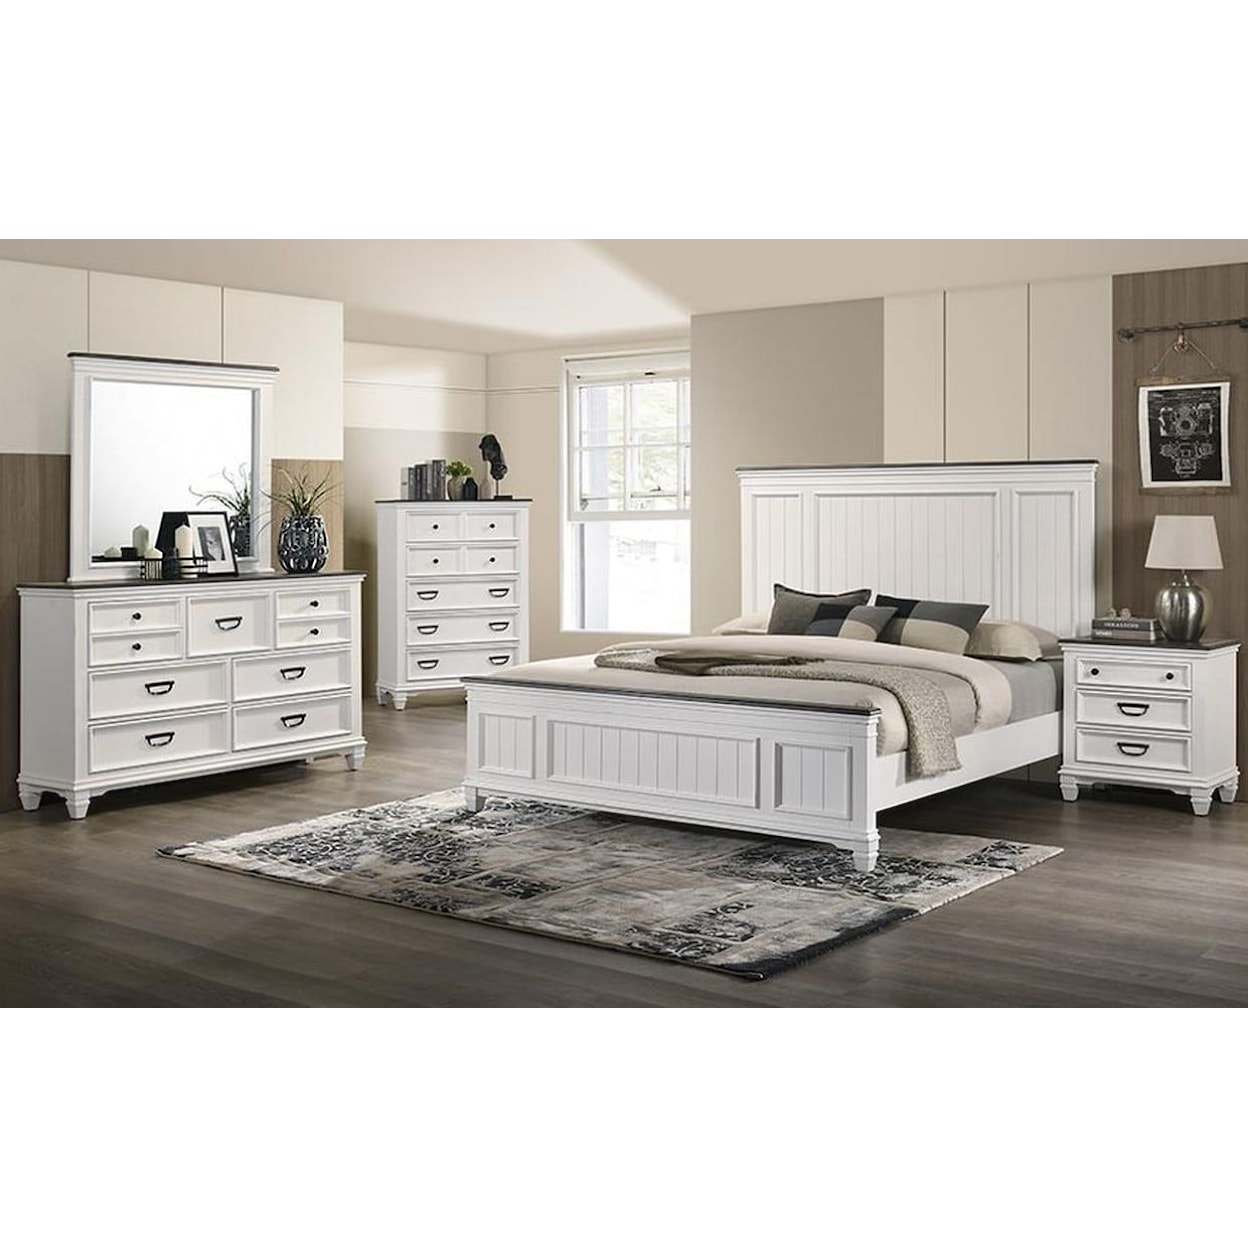 Lifestyle C8309A 7pc Queen Bedroom Group